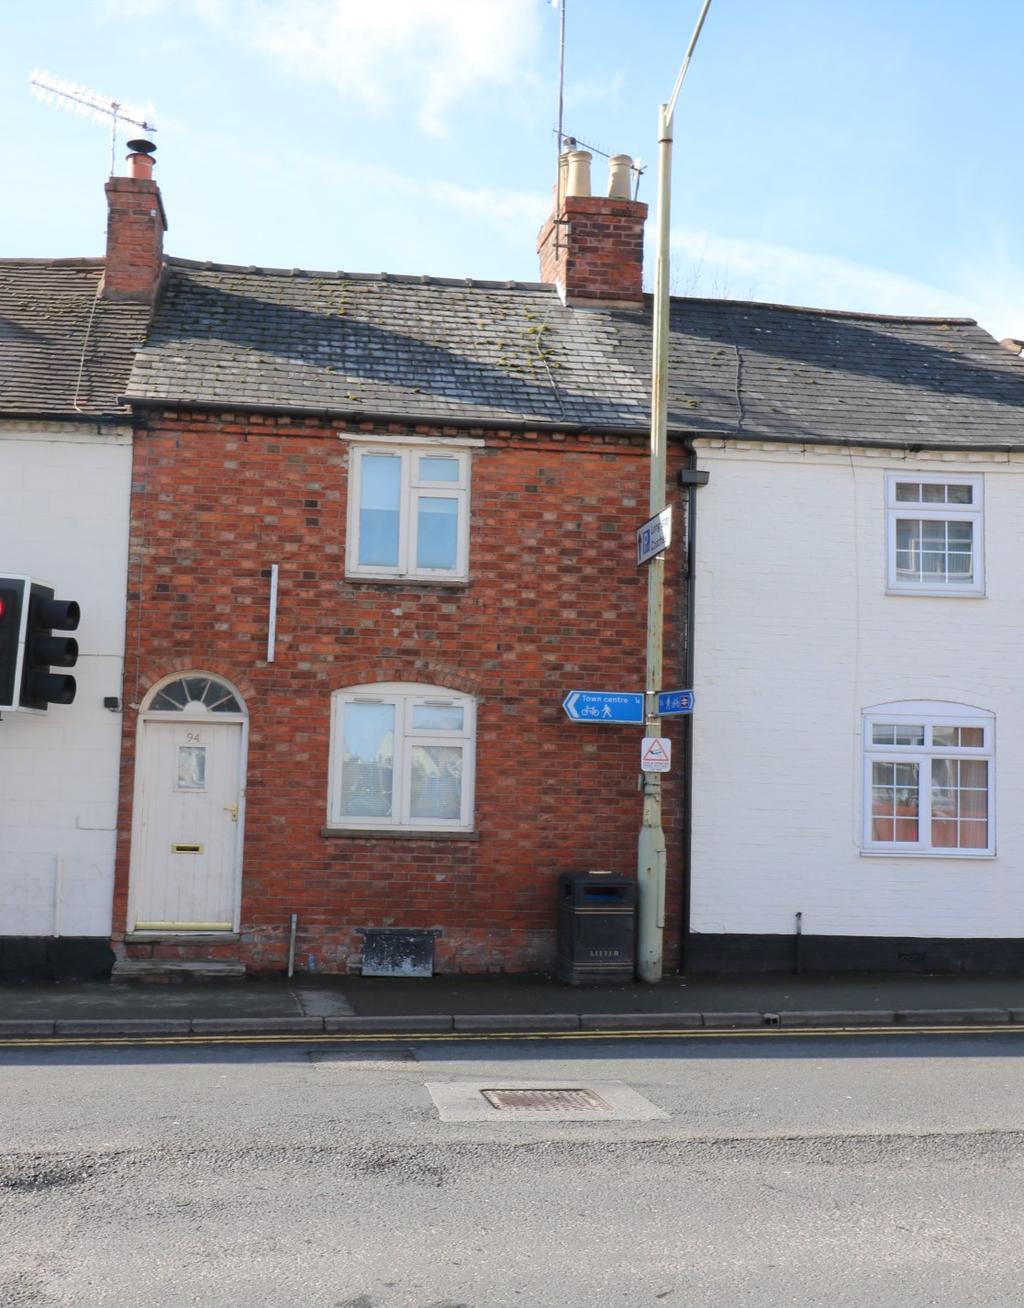 uk 94 High Street Pershore Worcestershire WR10 1DU For Sale Price 229,950 A PROMINENTLY SITUATED THREE BEDROOM